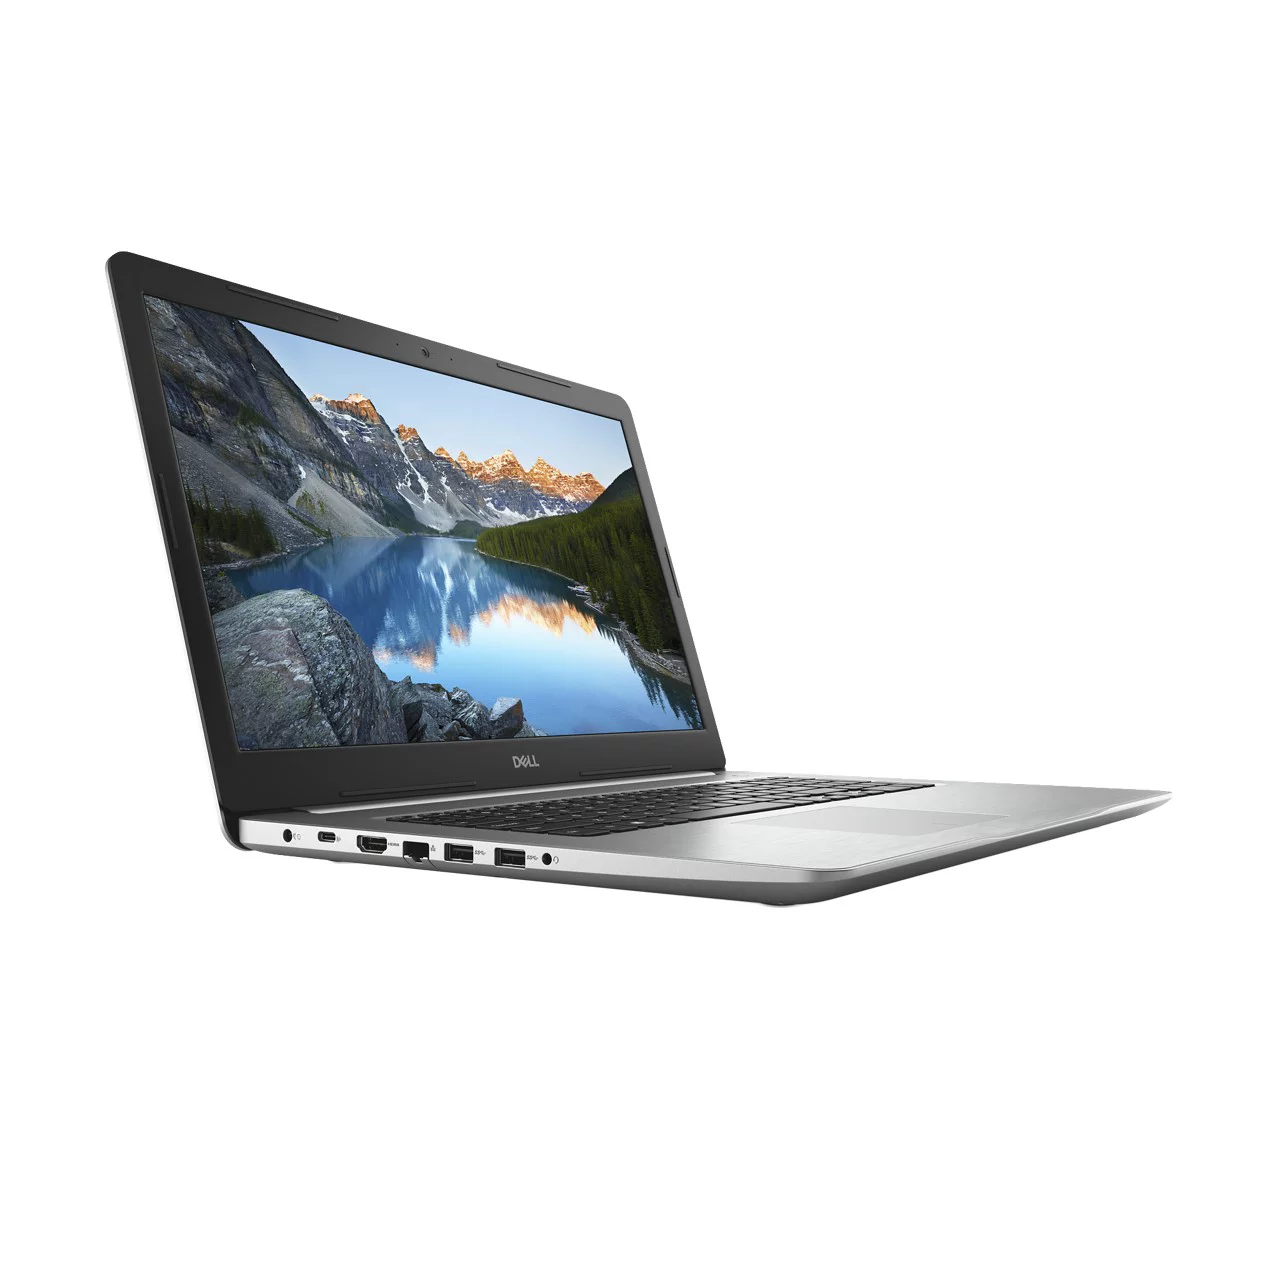  Dell Inspiron 17 5775 Notebook